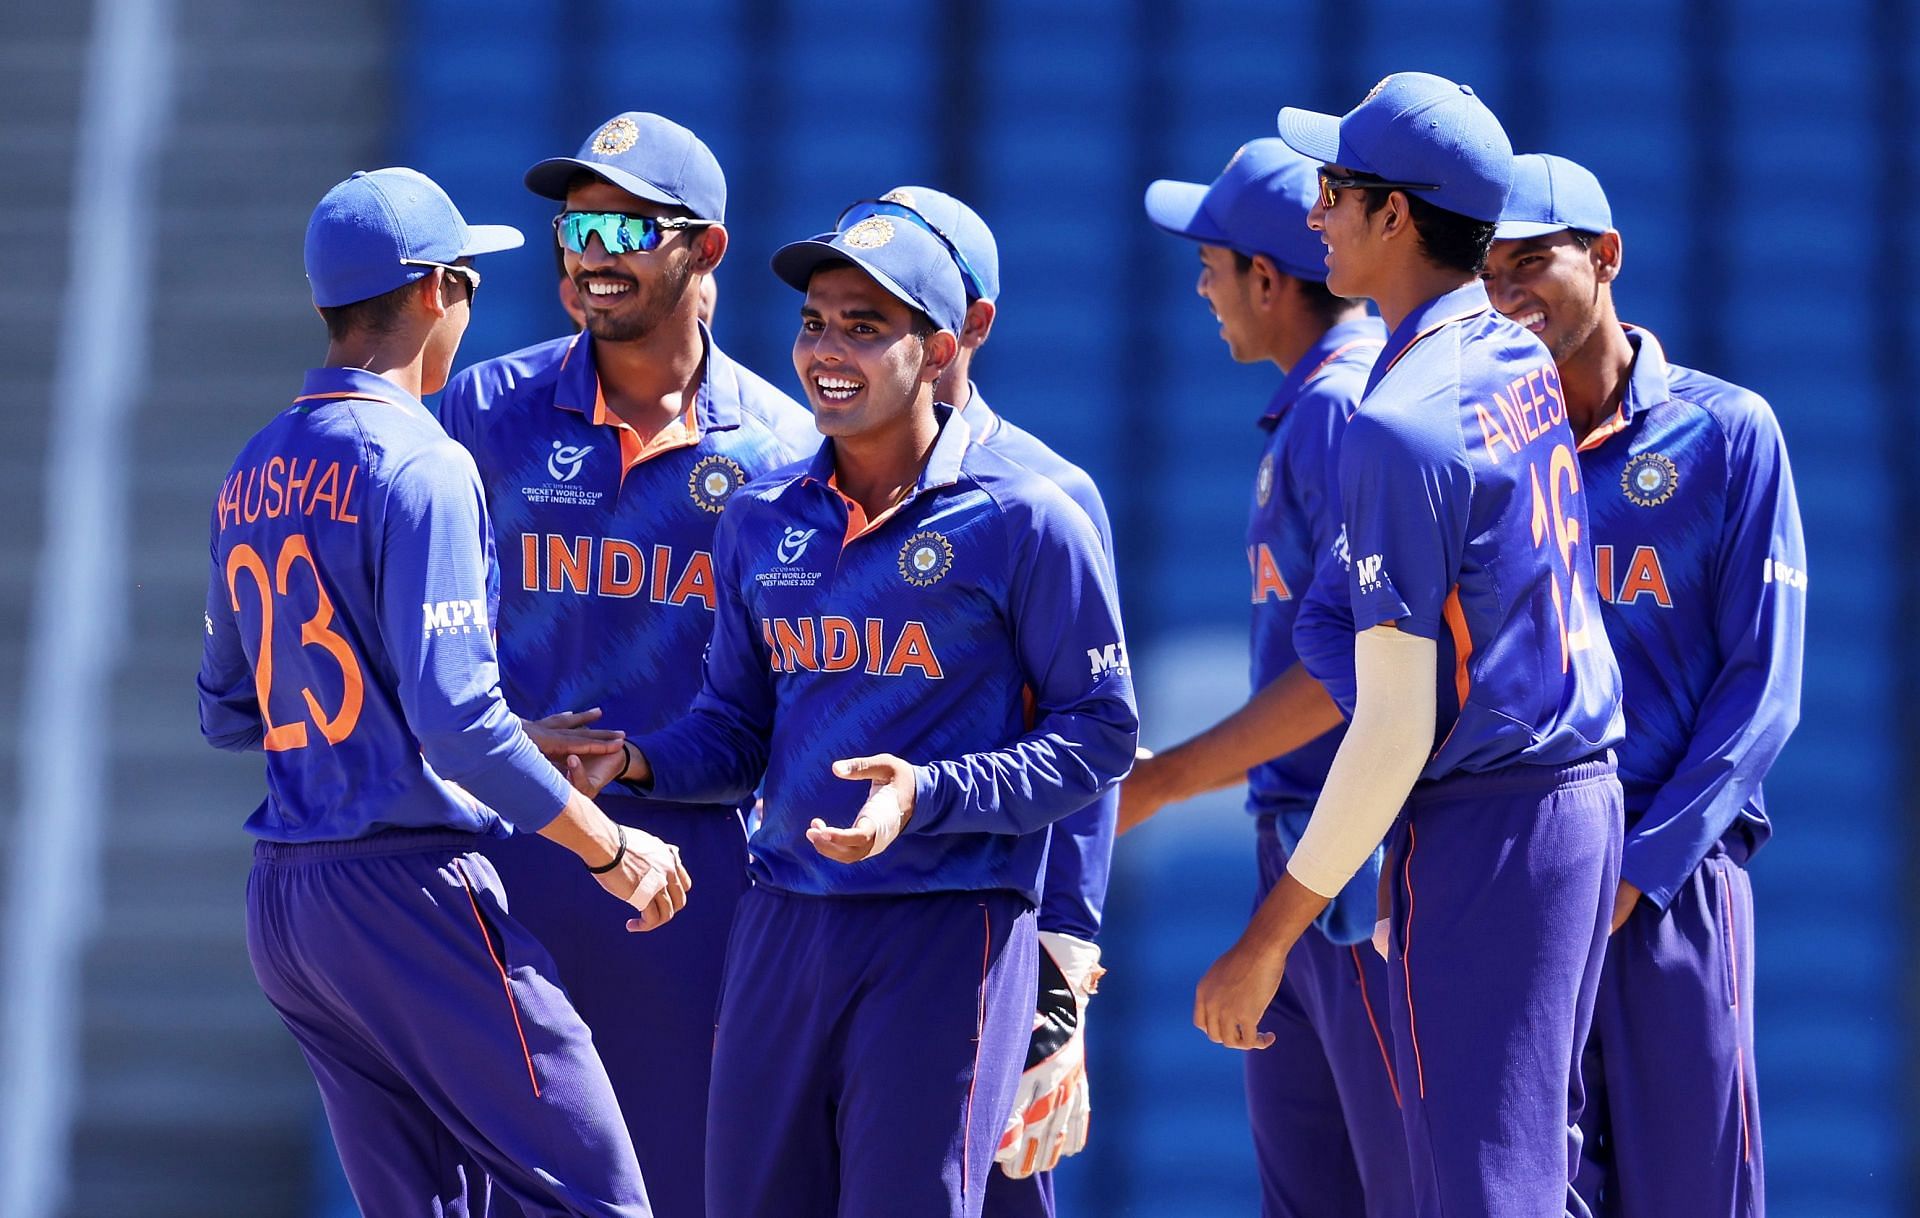 The India U19 cricket team in action (Image Courtesy: www.bcci.tv)